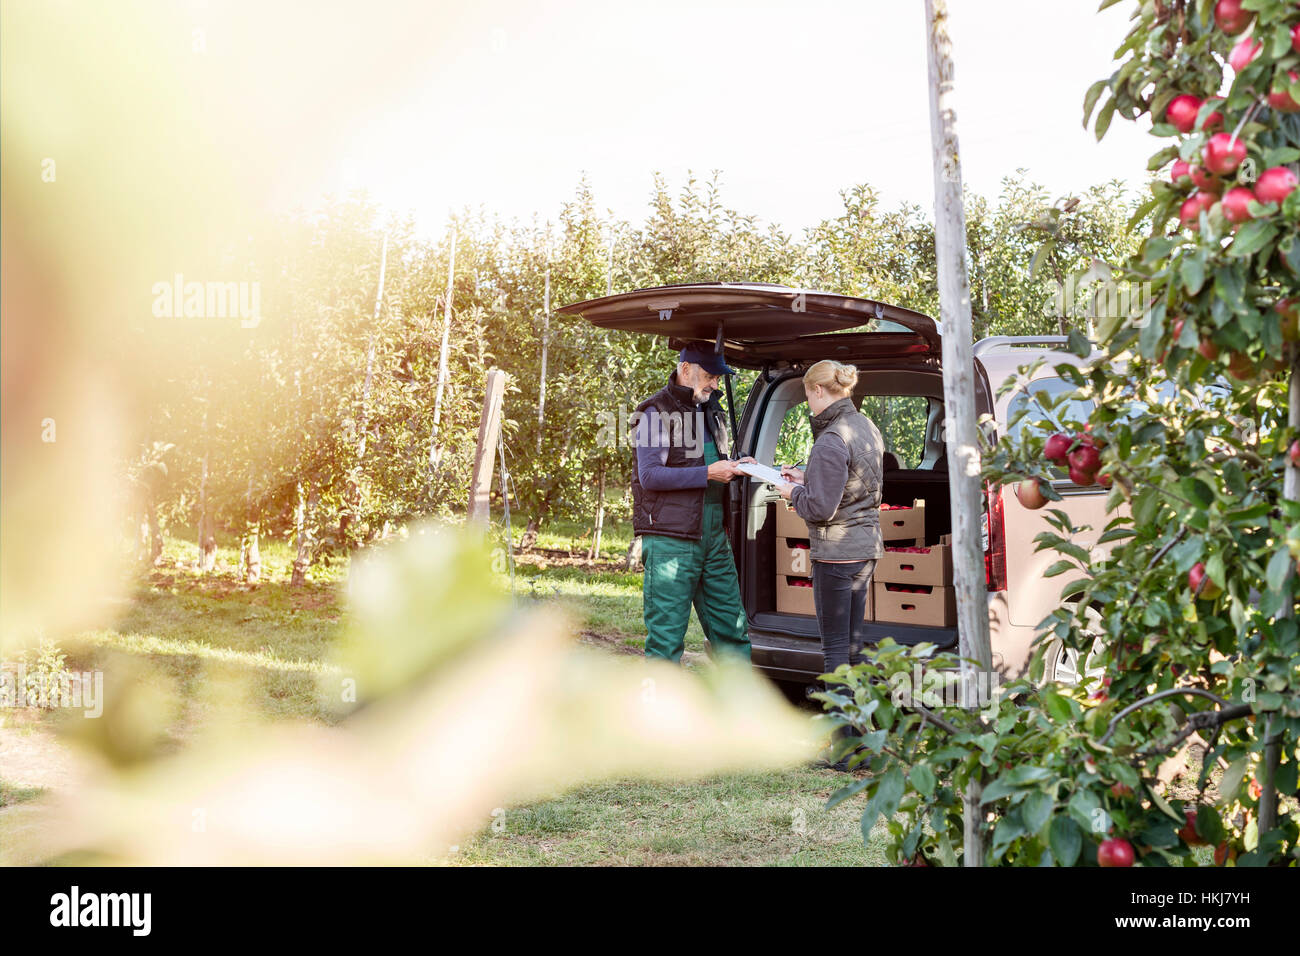 Farmer and customer at back of van in apple orchard Stock Photo